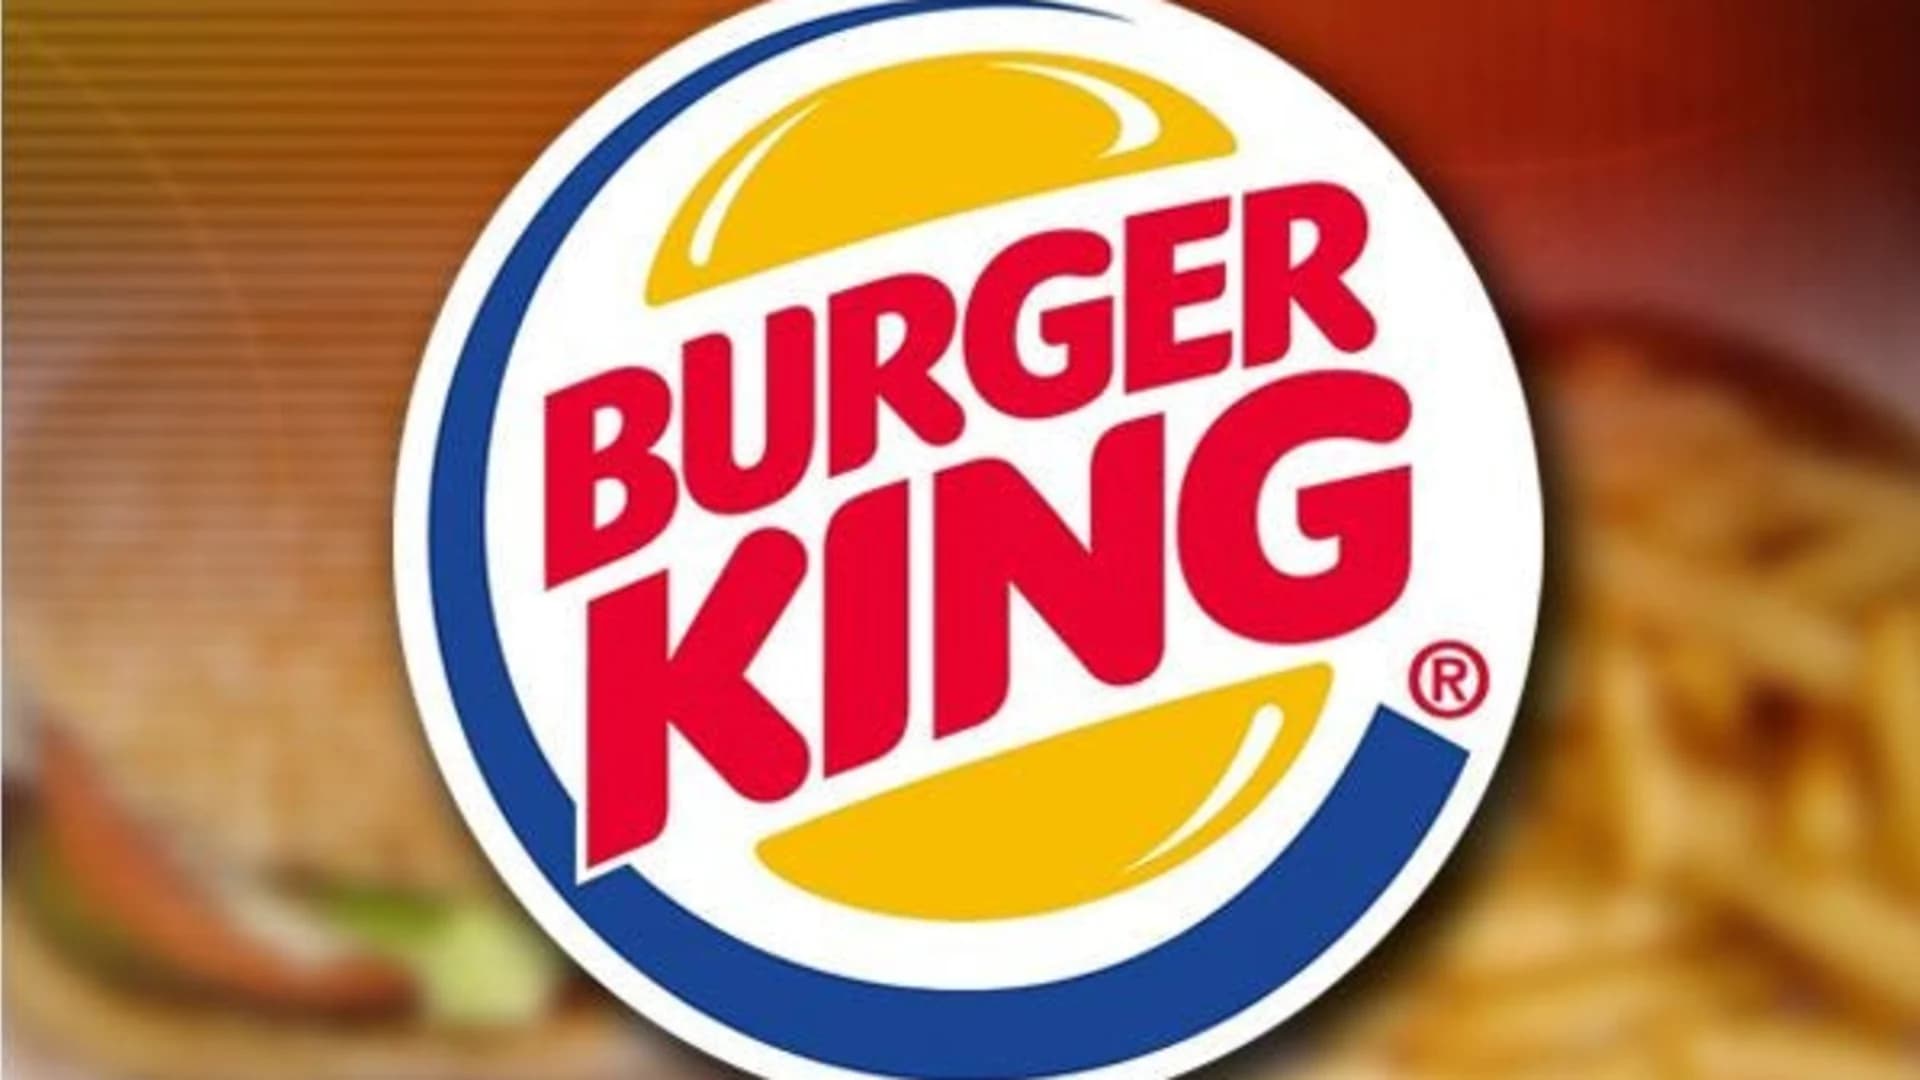 Bayonne police: Road rage incident prompts bleach attach at Burger King